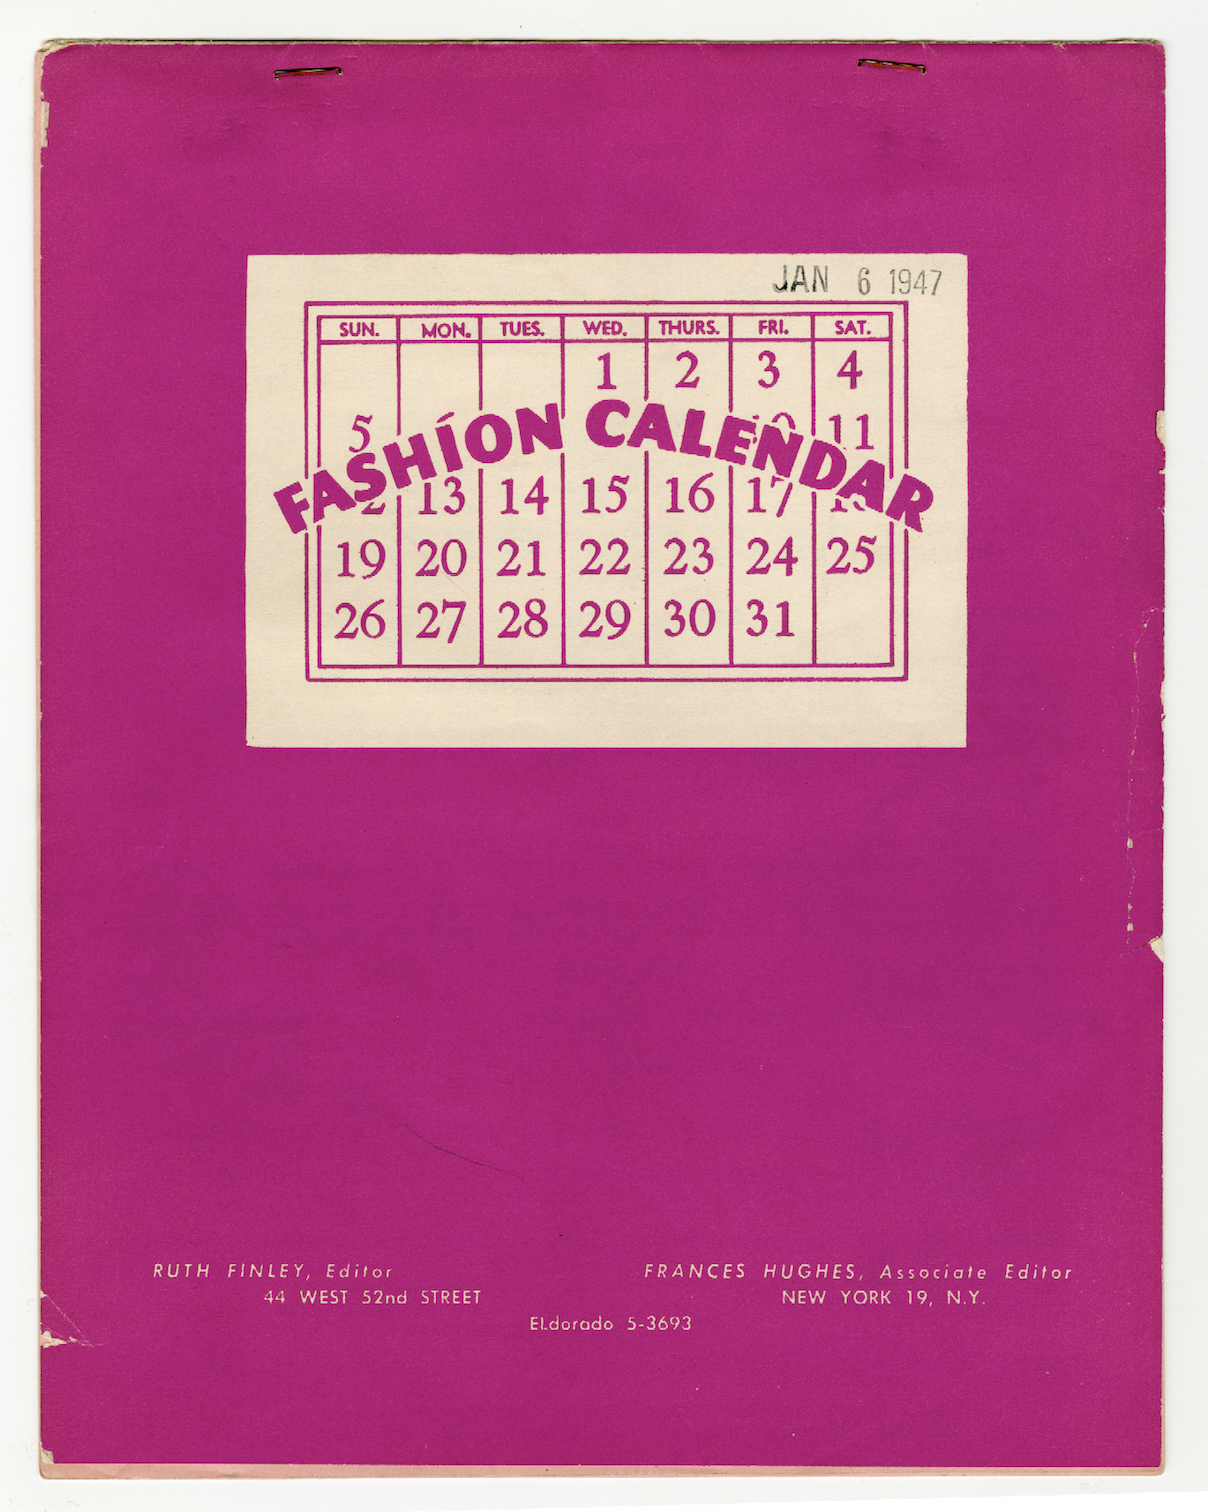  Image provided by the author. Courtesy of Special Collections at The Fashion Institute of Technology. 